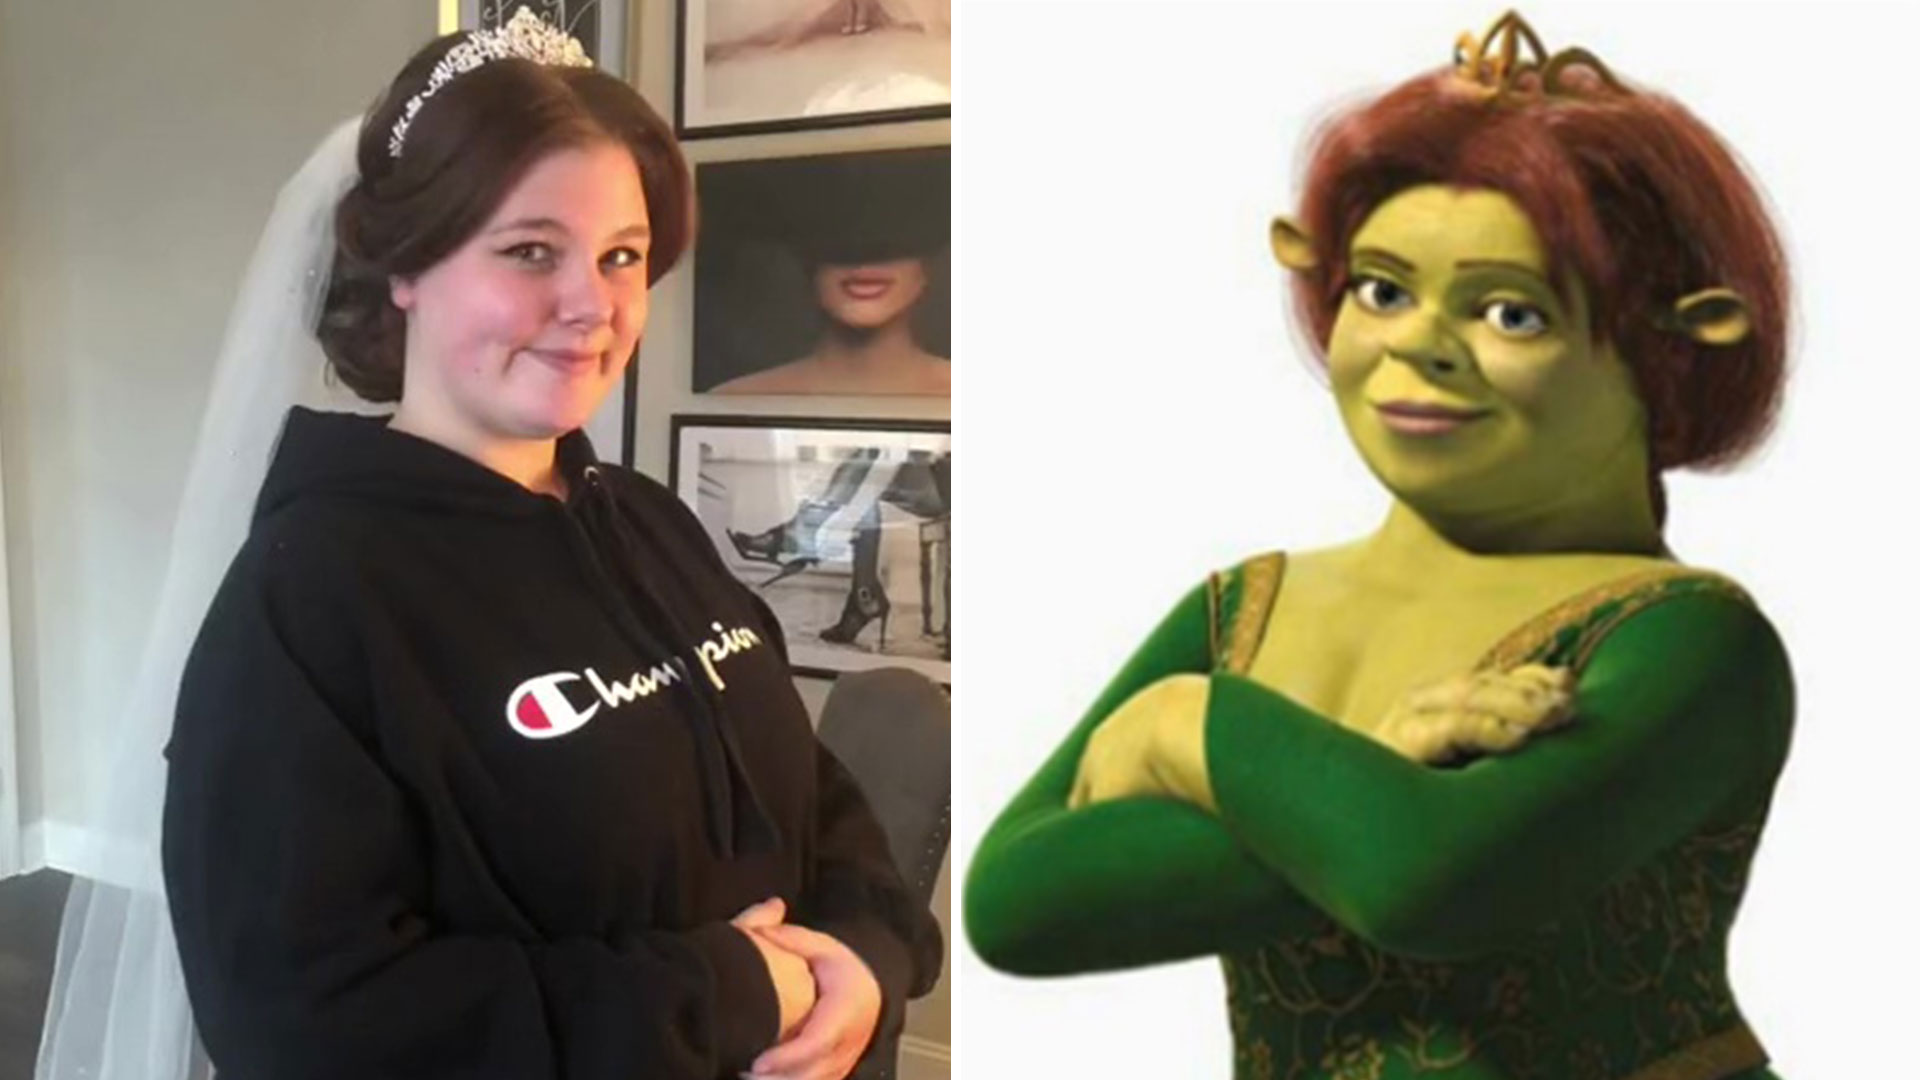 I was chuffed with my bridal hair - then realised I looked like Princess Fiona